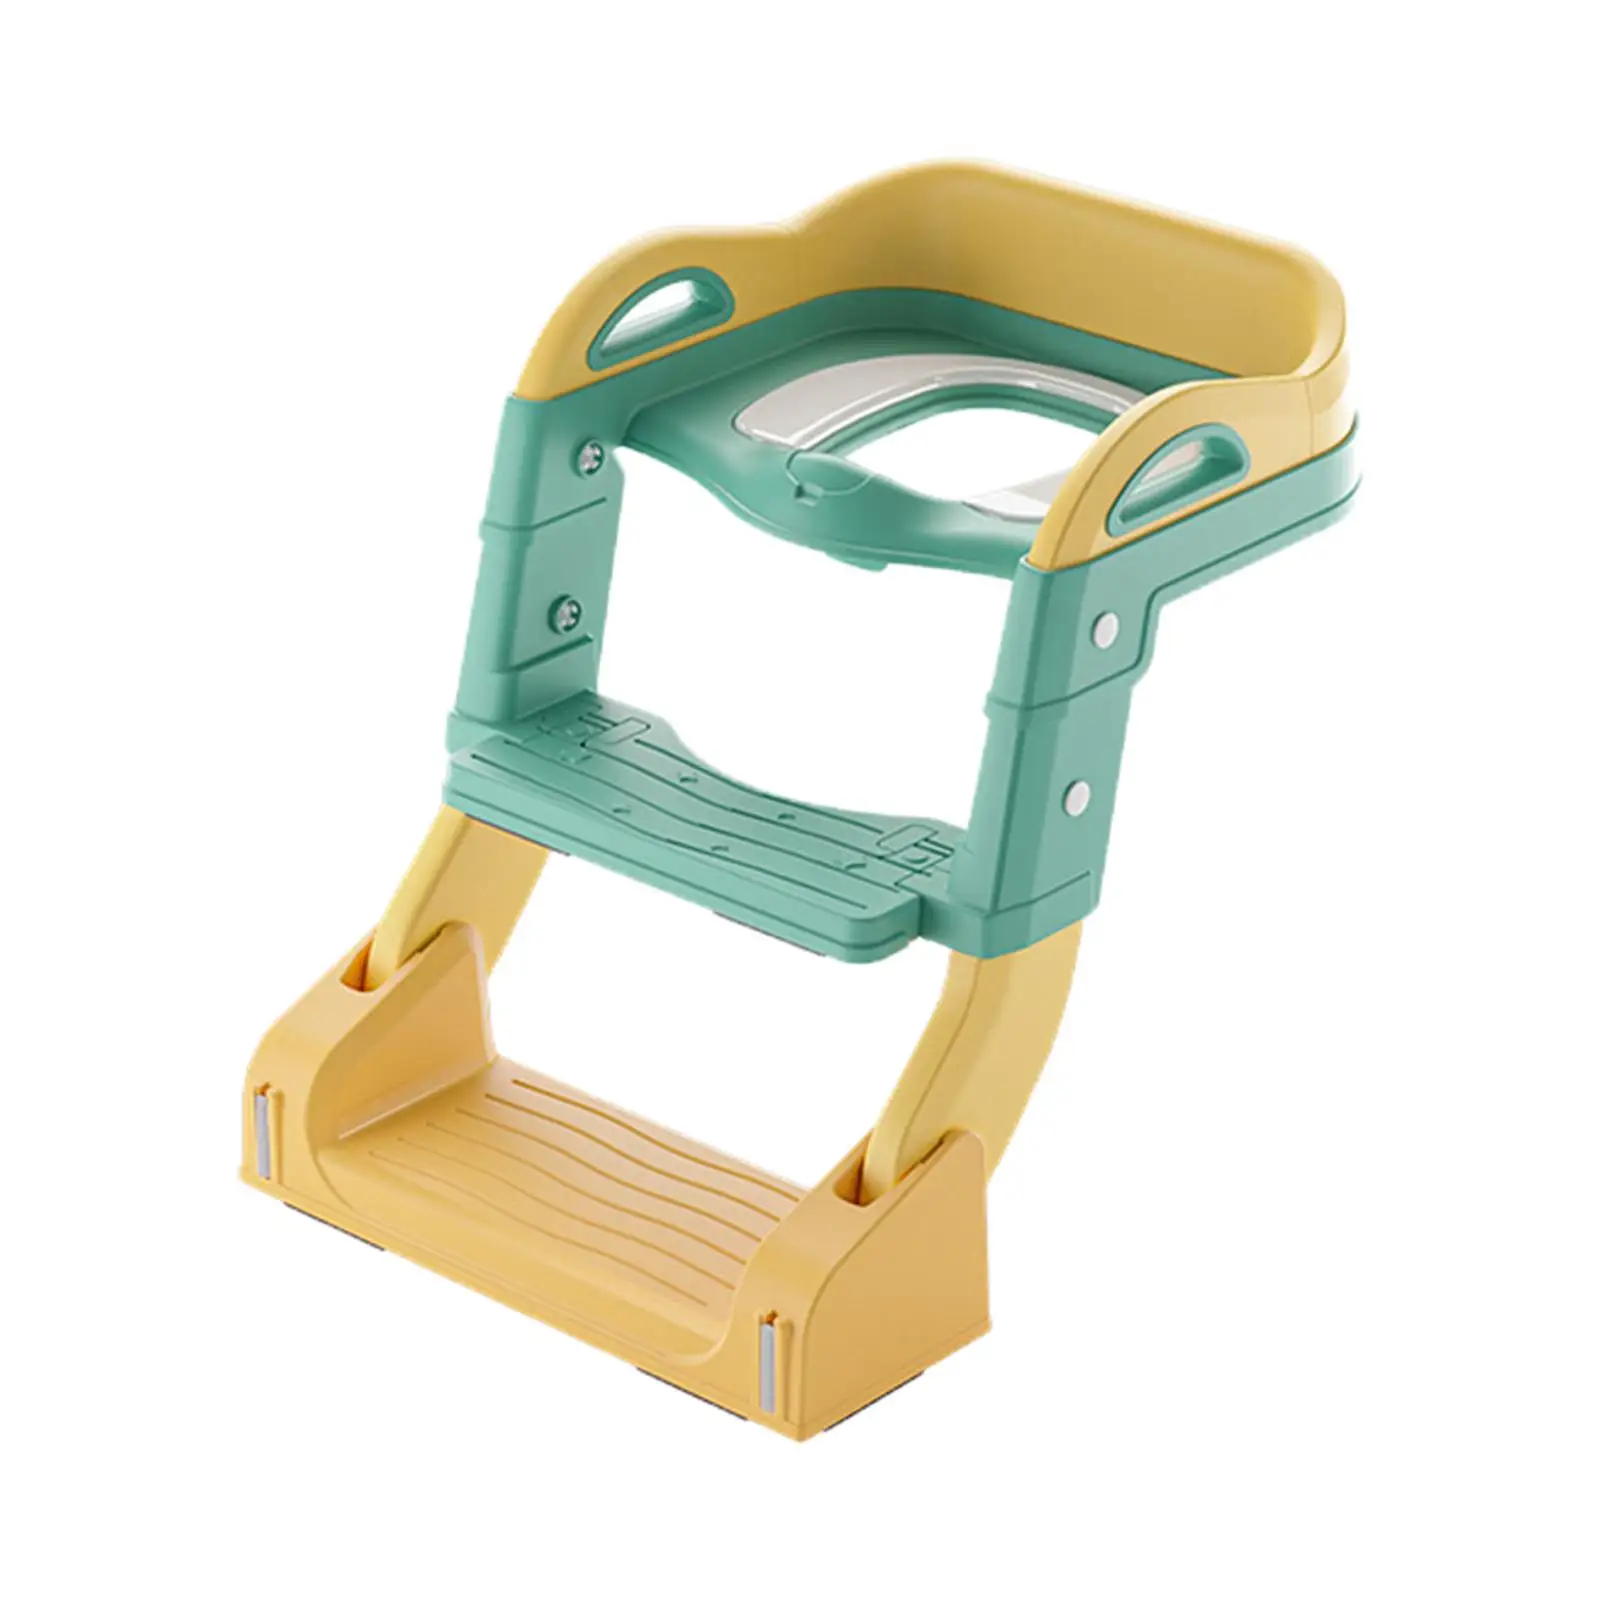 Kids Toilet Training Seat with Ladder Baby Infant Potty Comfortable Toddler Folding Portable Boy Girl Potty Toilet Trainer Seat